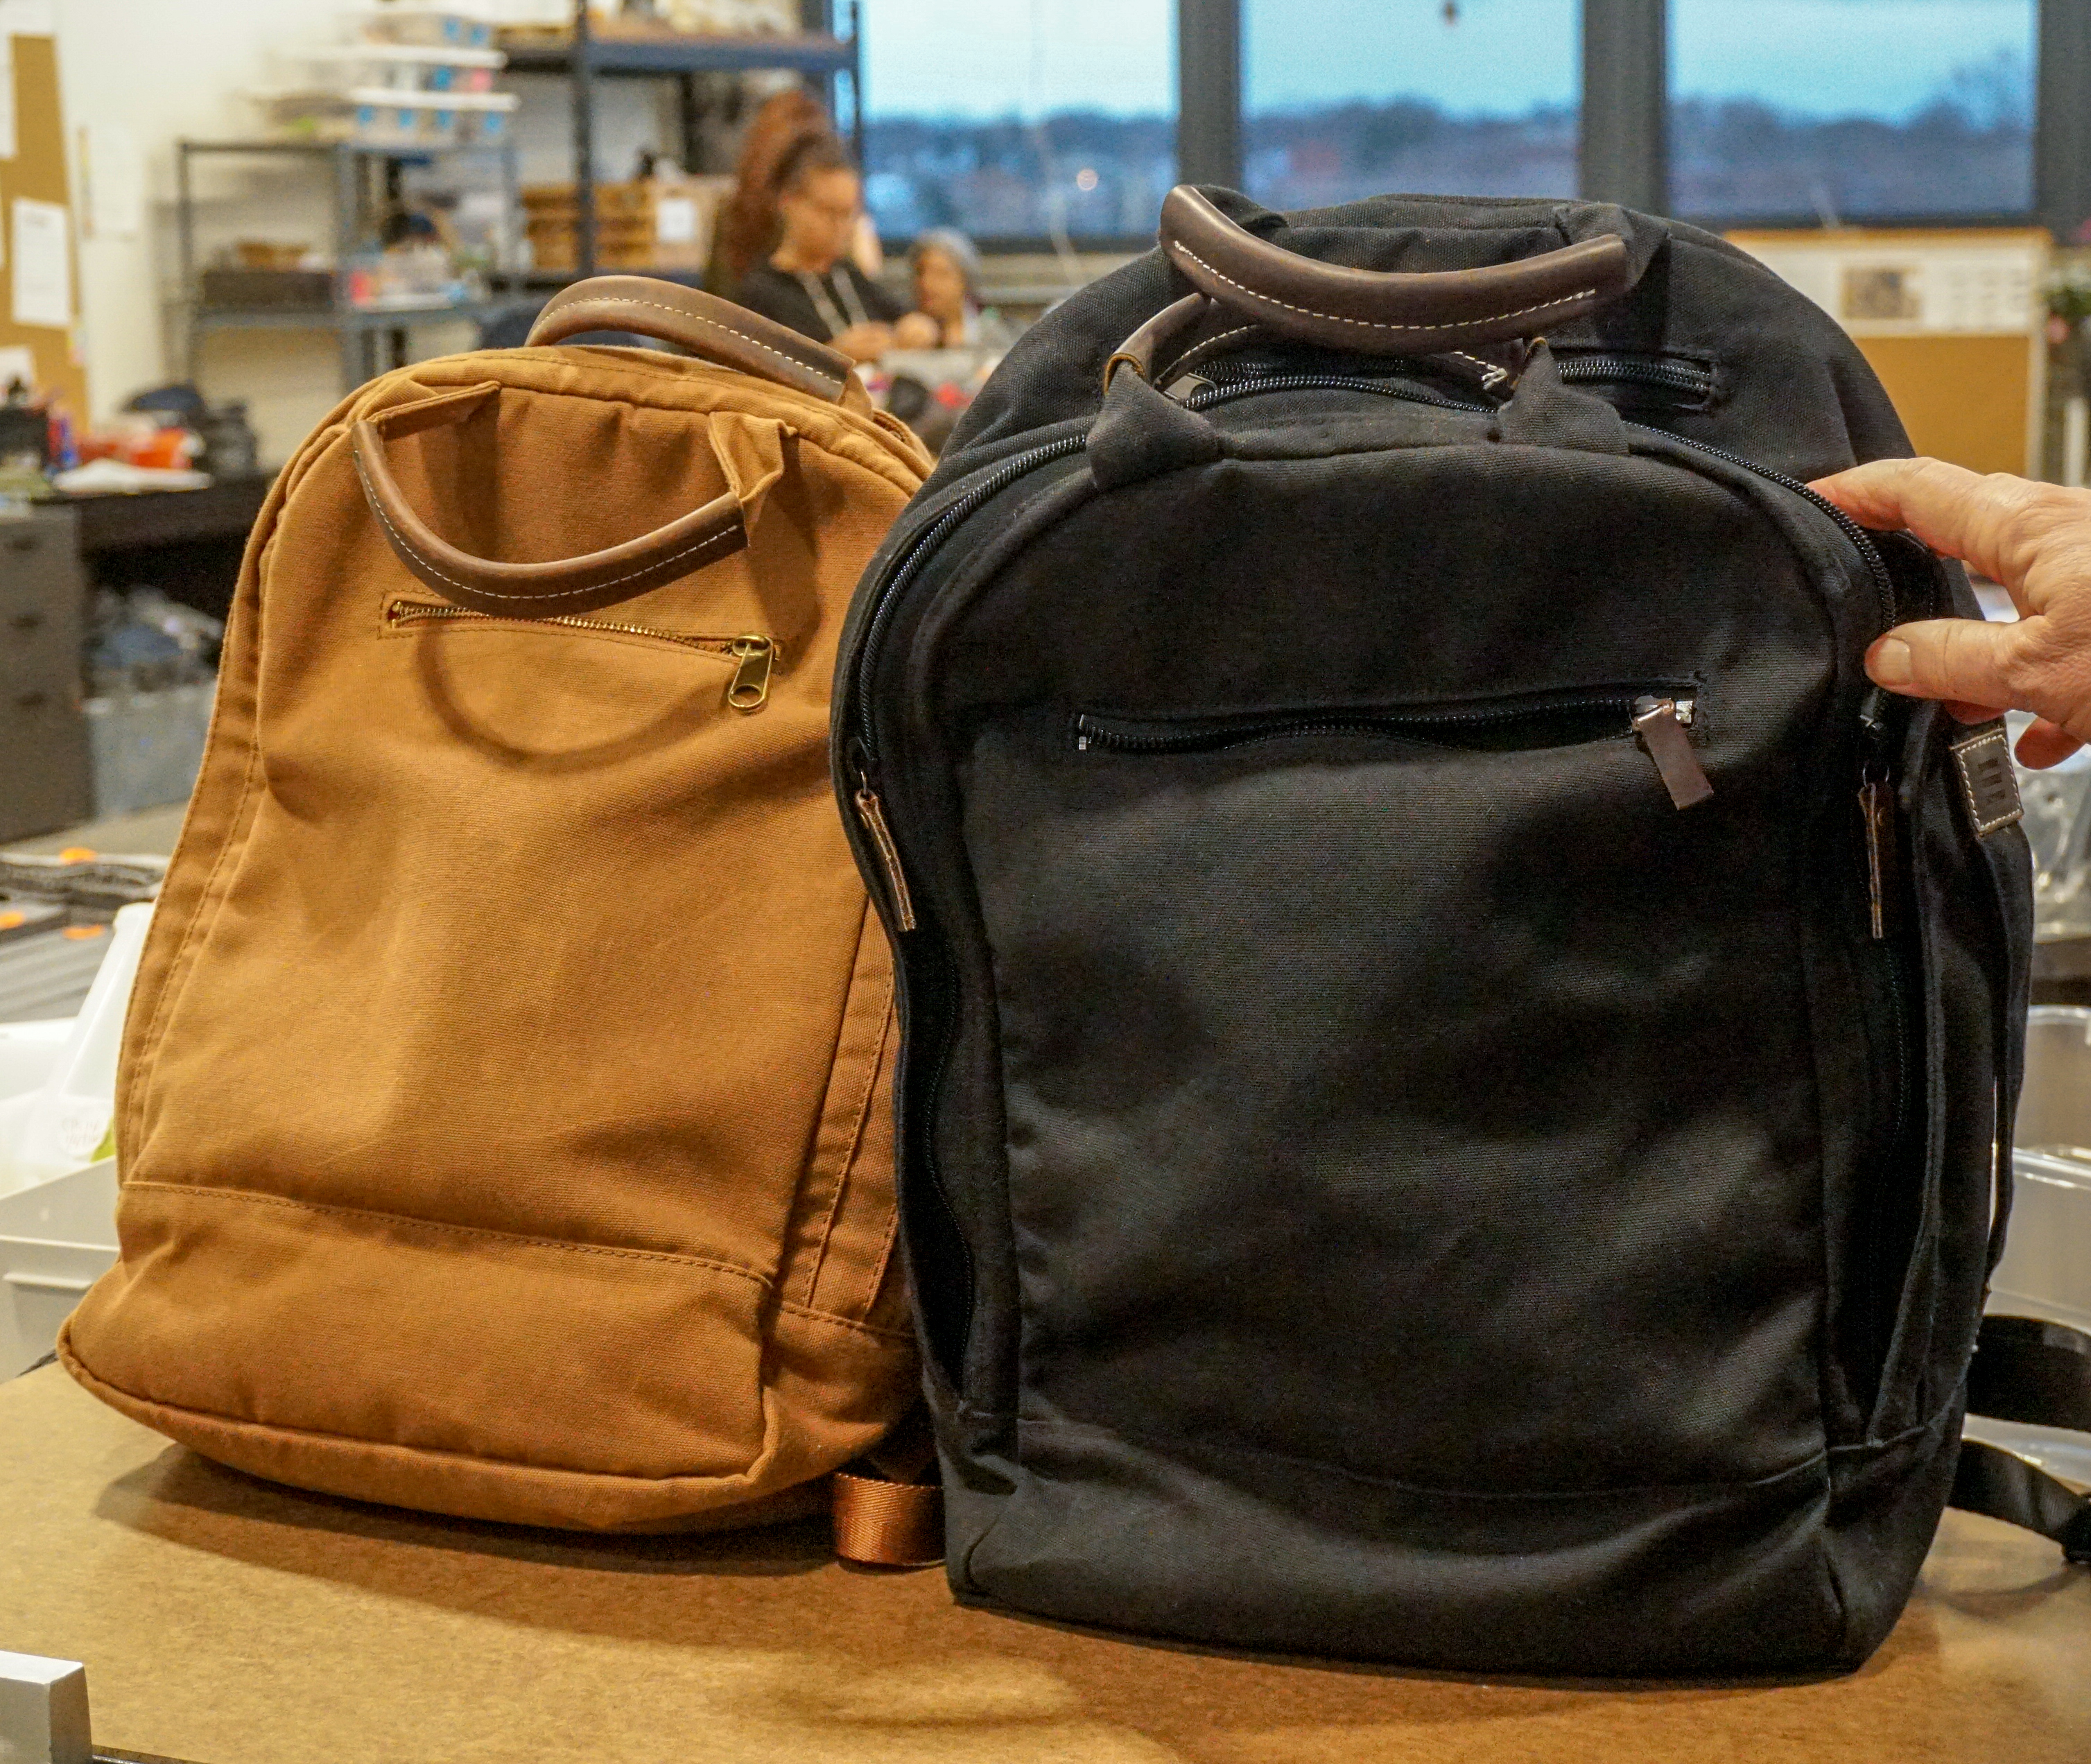 Thread International A Better Backpack in brown and black